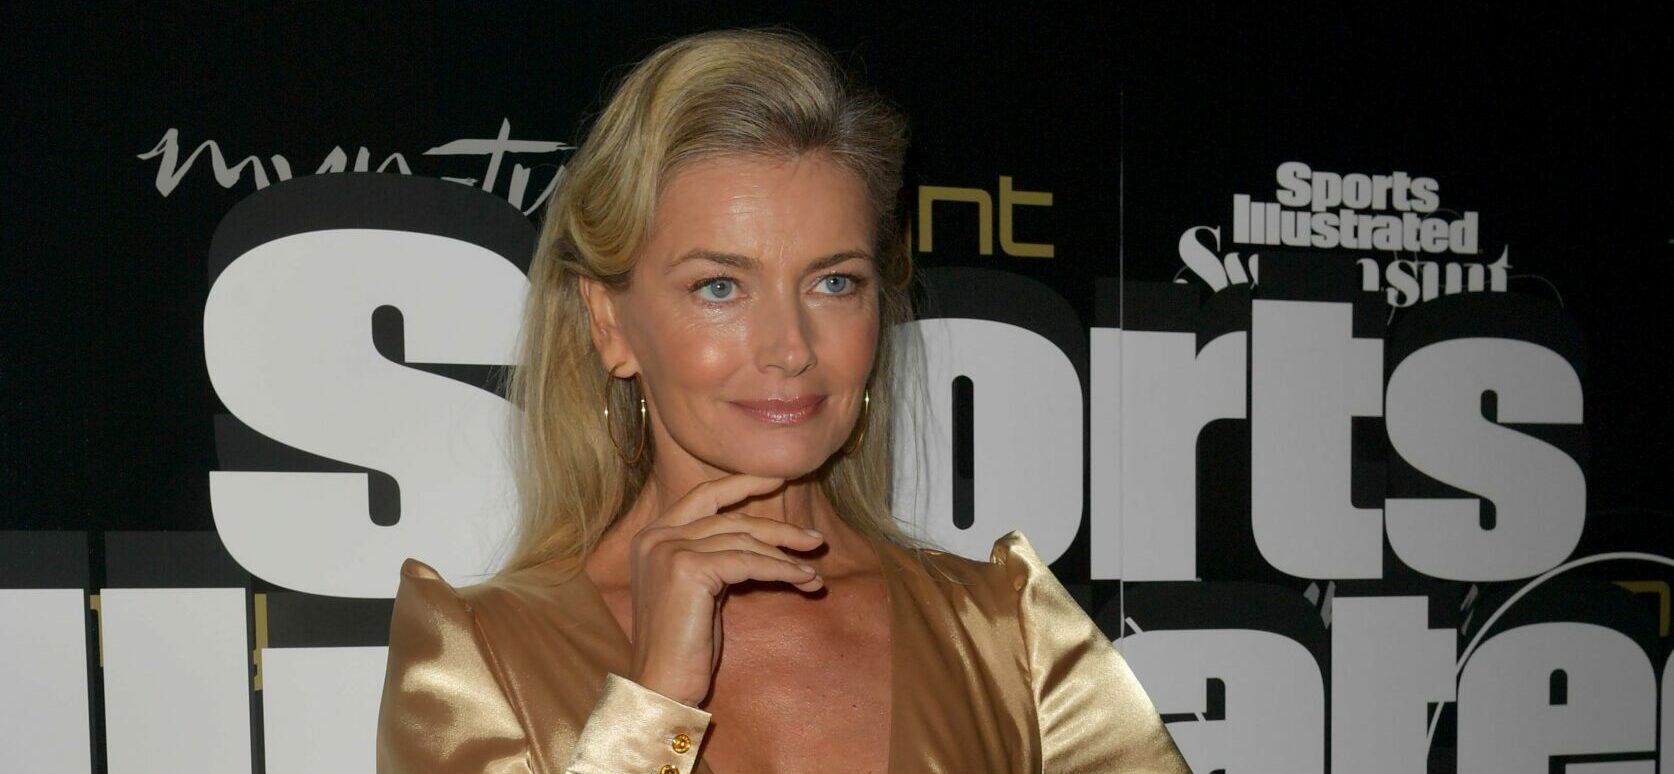 Model Paulina Porizkova Fires Back At Ageist Comments: ‘Apparently I Look Seventy’